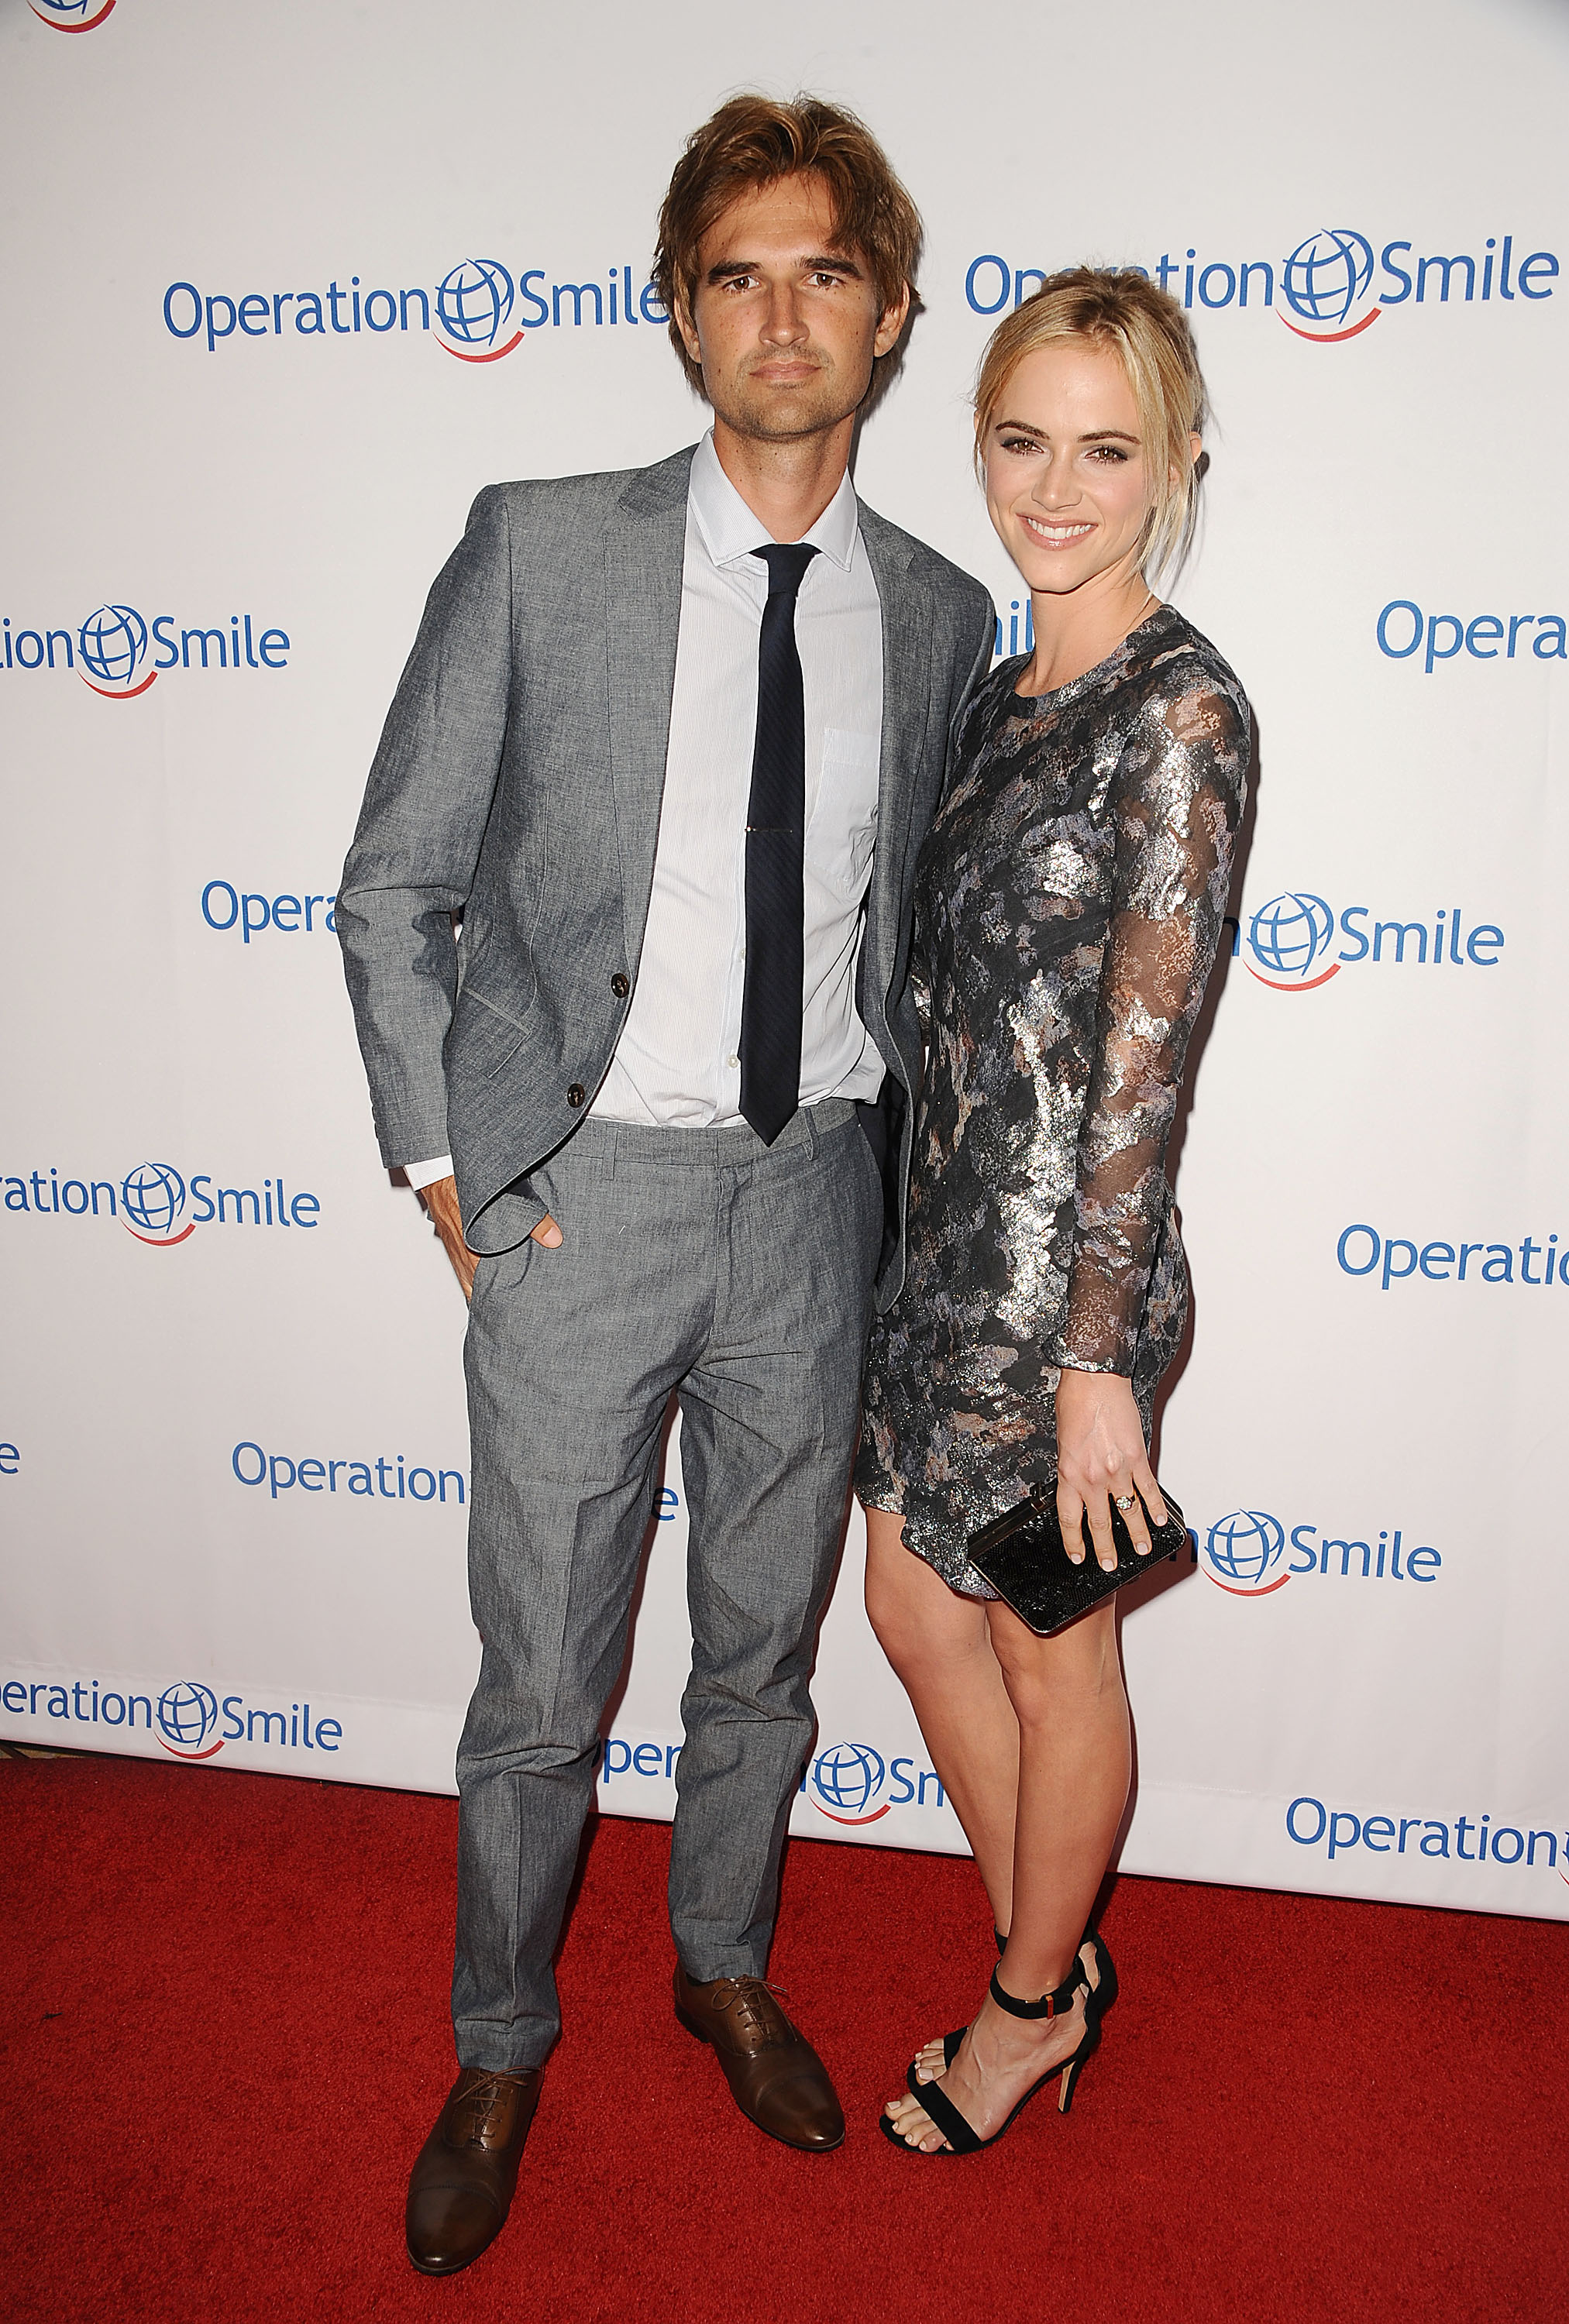 Blake Hanley and Emily Wickersham at the Operation Smile Gala in Beverly Hills, California on September 19, 2014 | Source: Getty Images